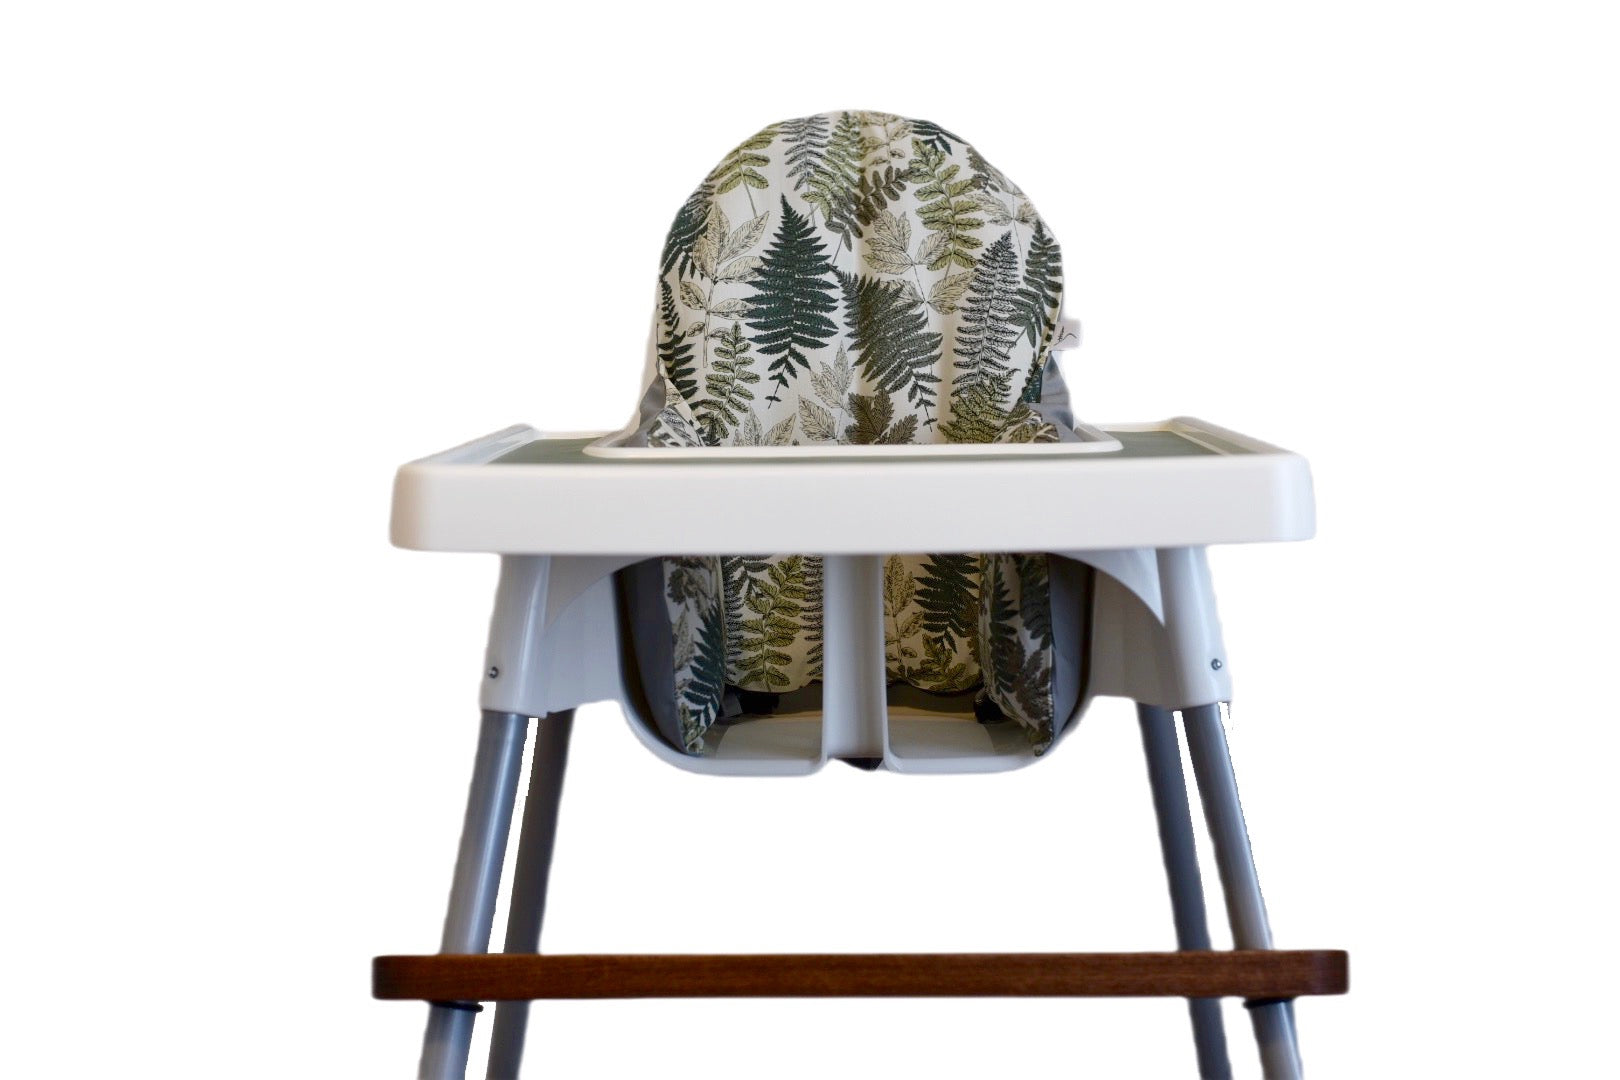 Walnut footrest on IKEA High Chair with Sage placemat and Friendly Ferns cushion cover.